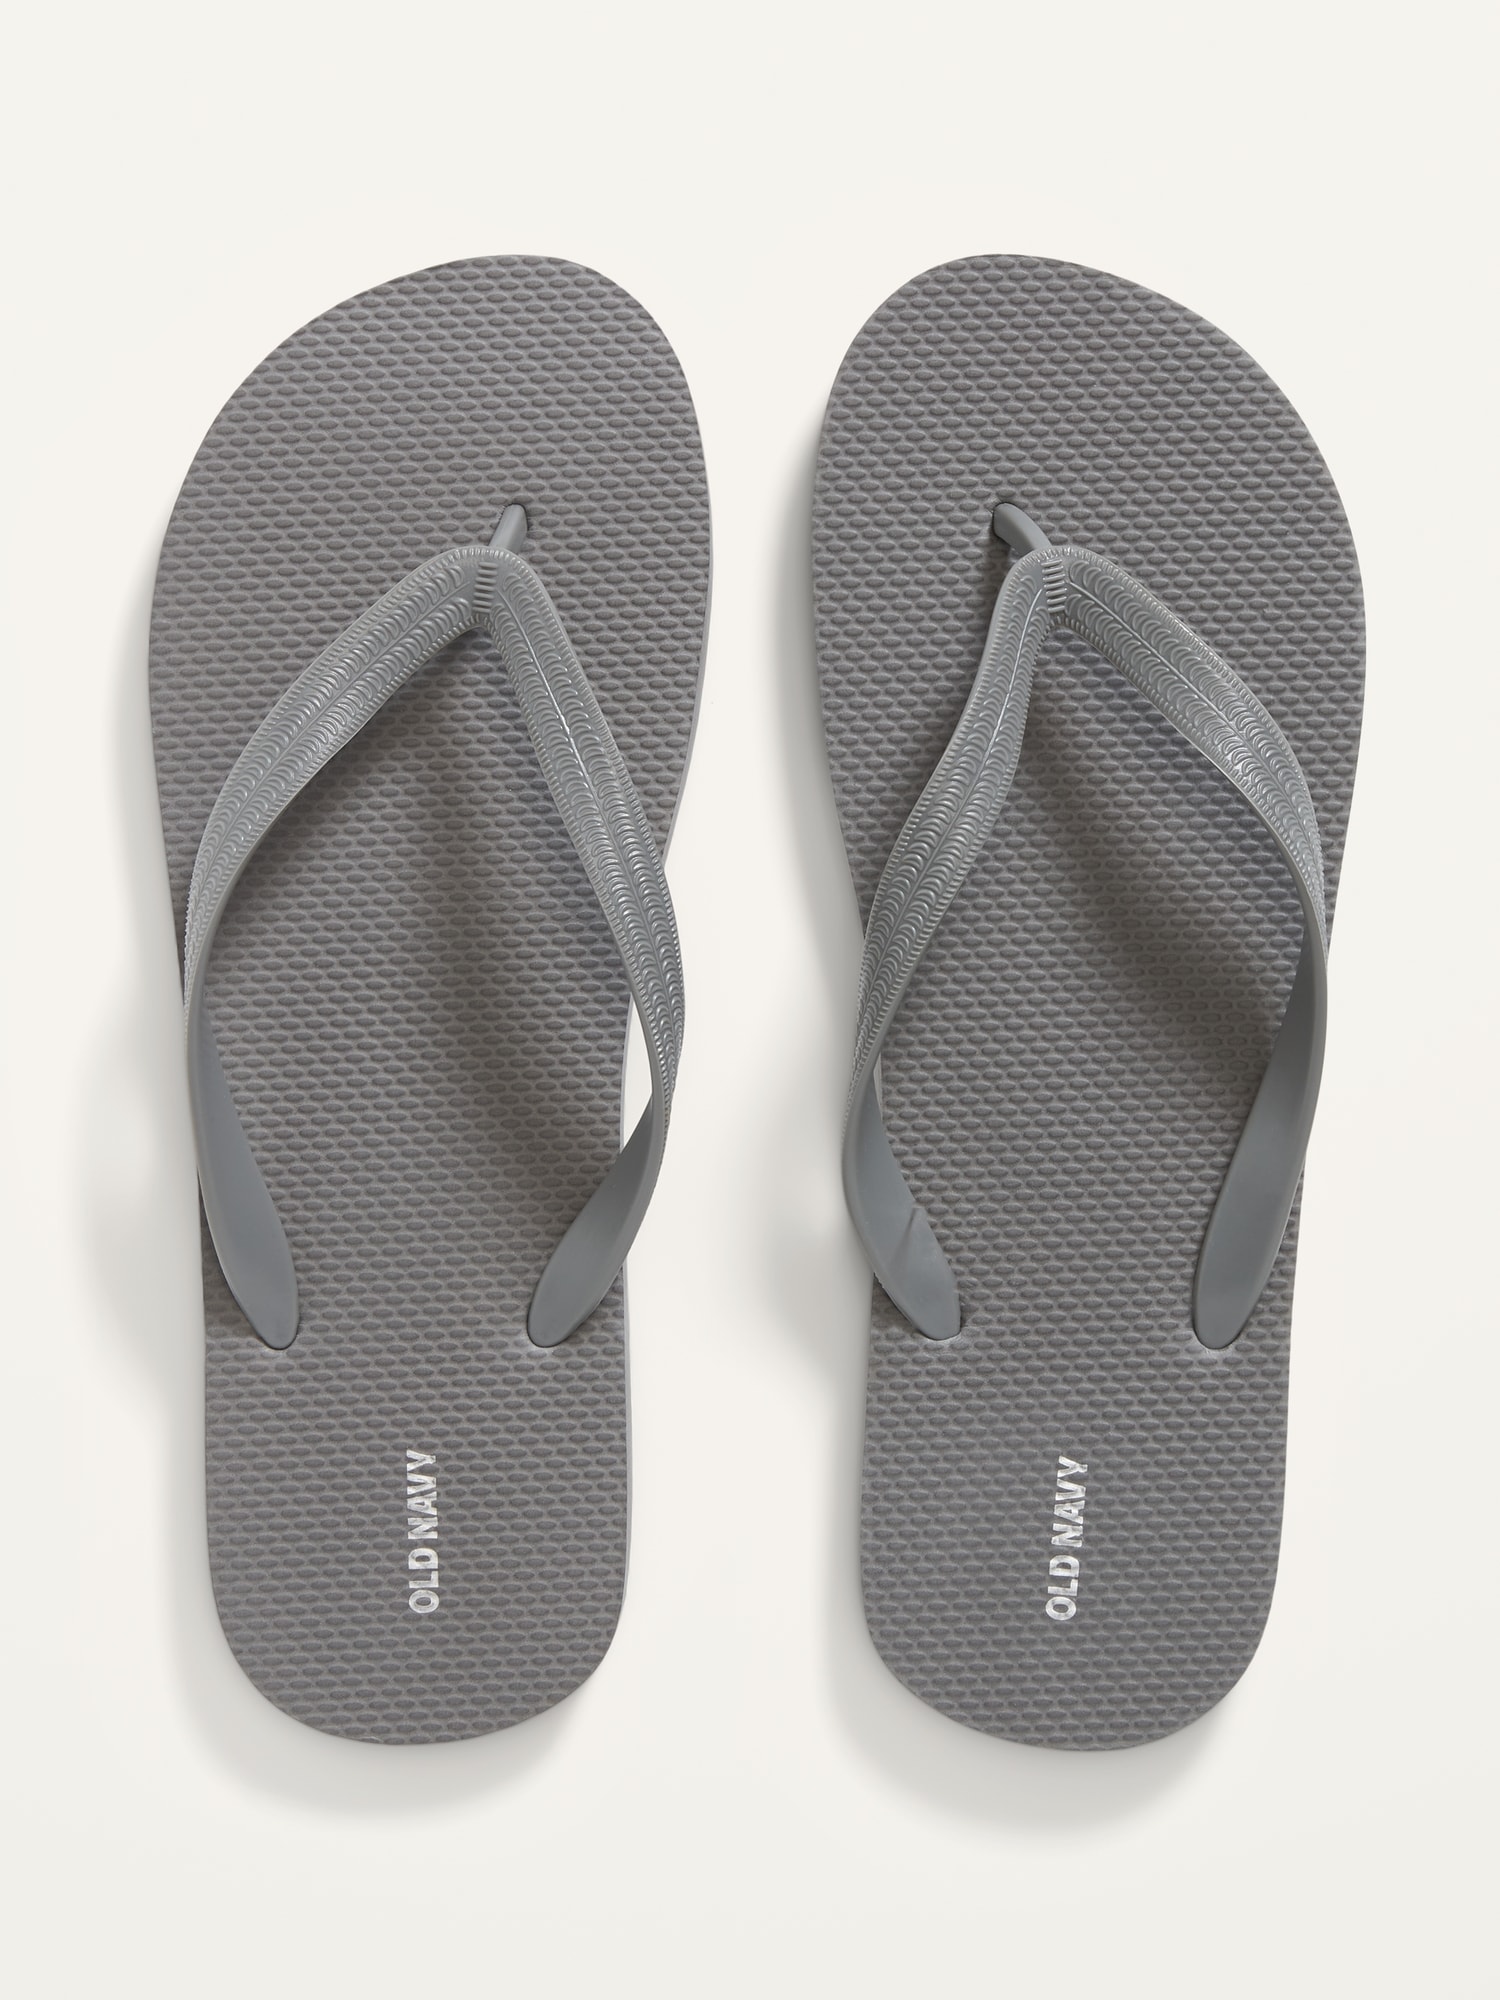 Old Navy Flip-Flop Sandals (Partially Plant-Based) gray. 1